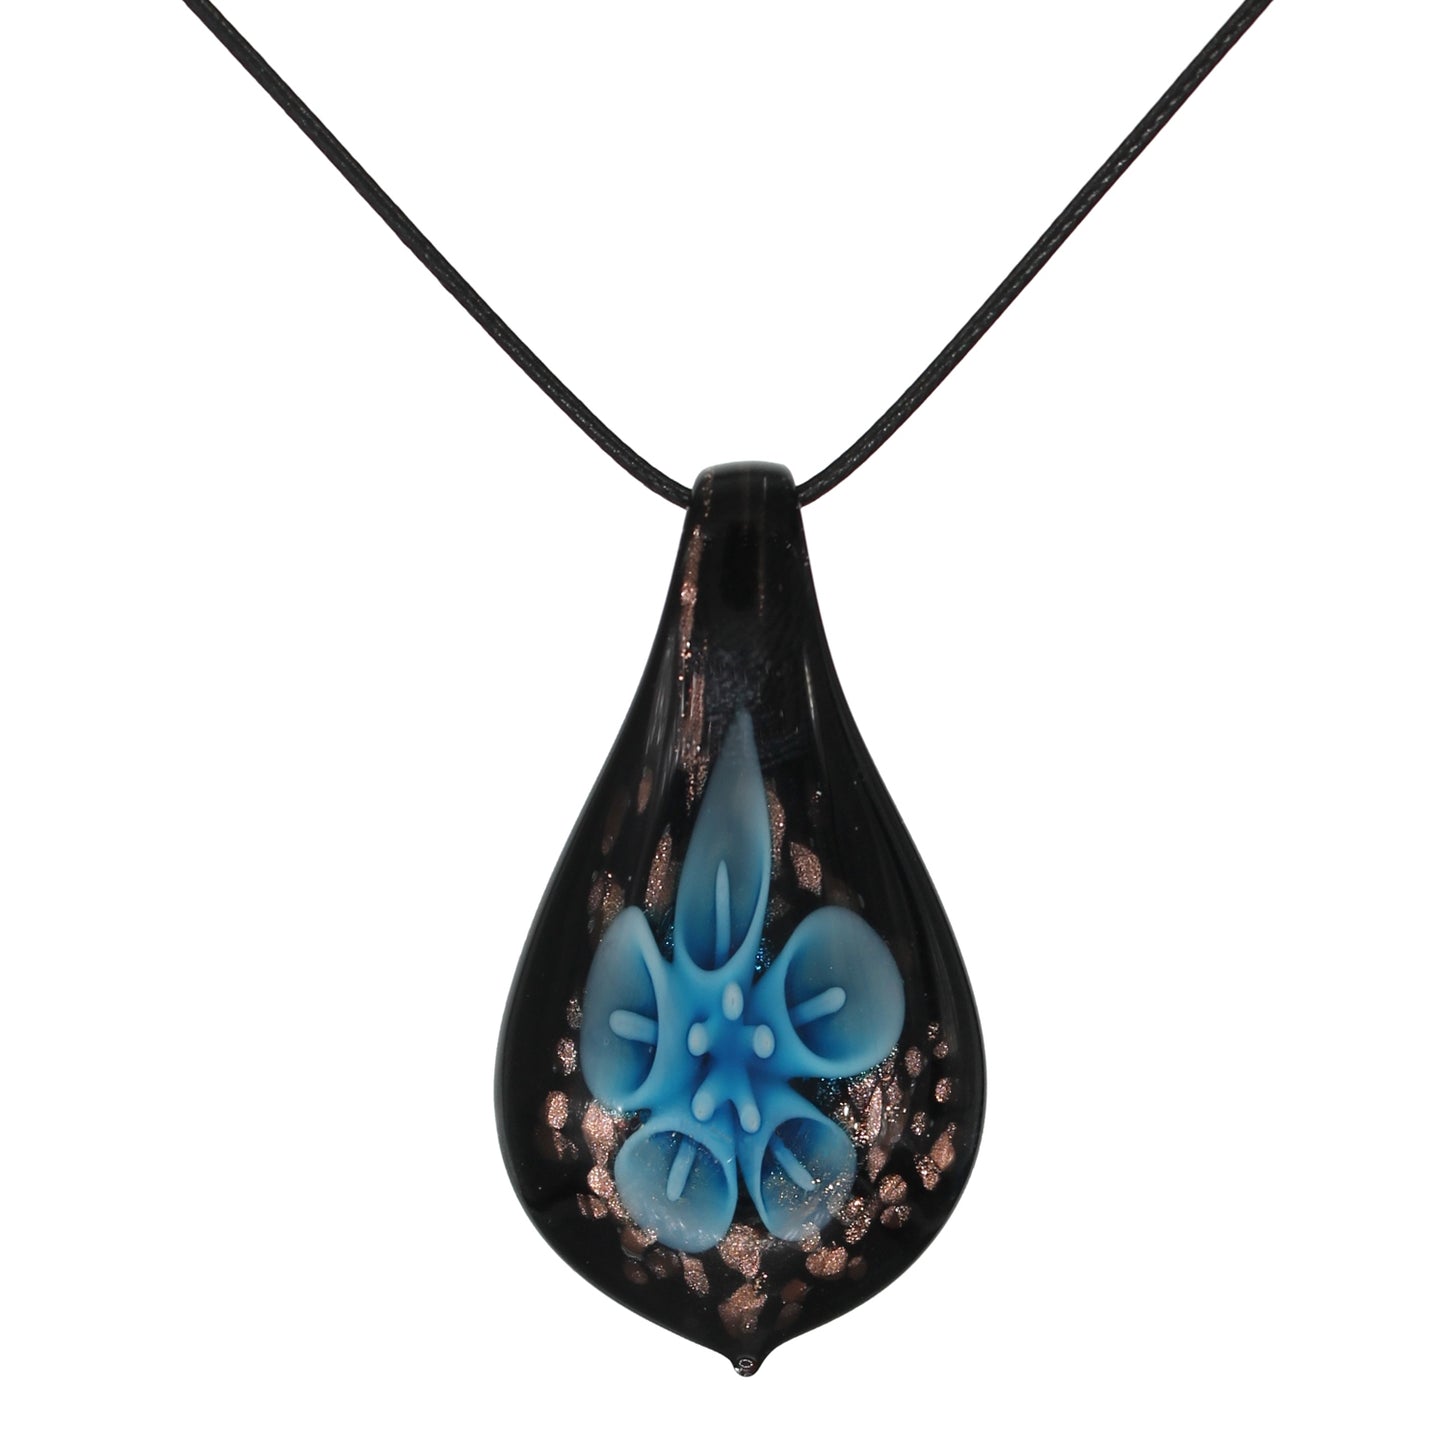 Glass Black and Blue Lily Flower Teardrop Pendant Necklace